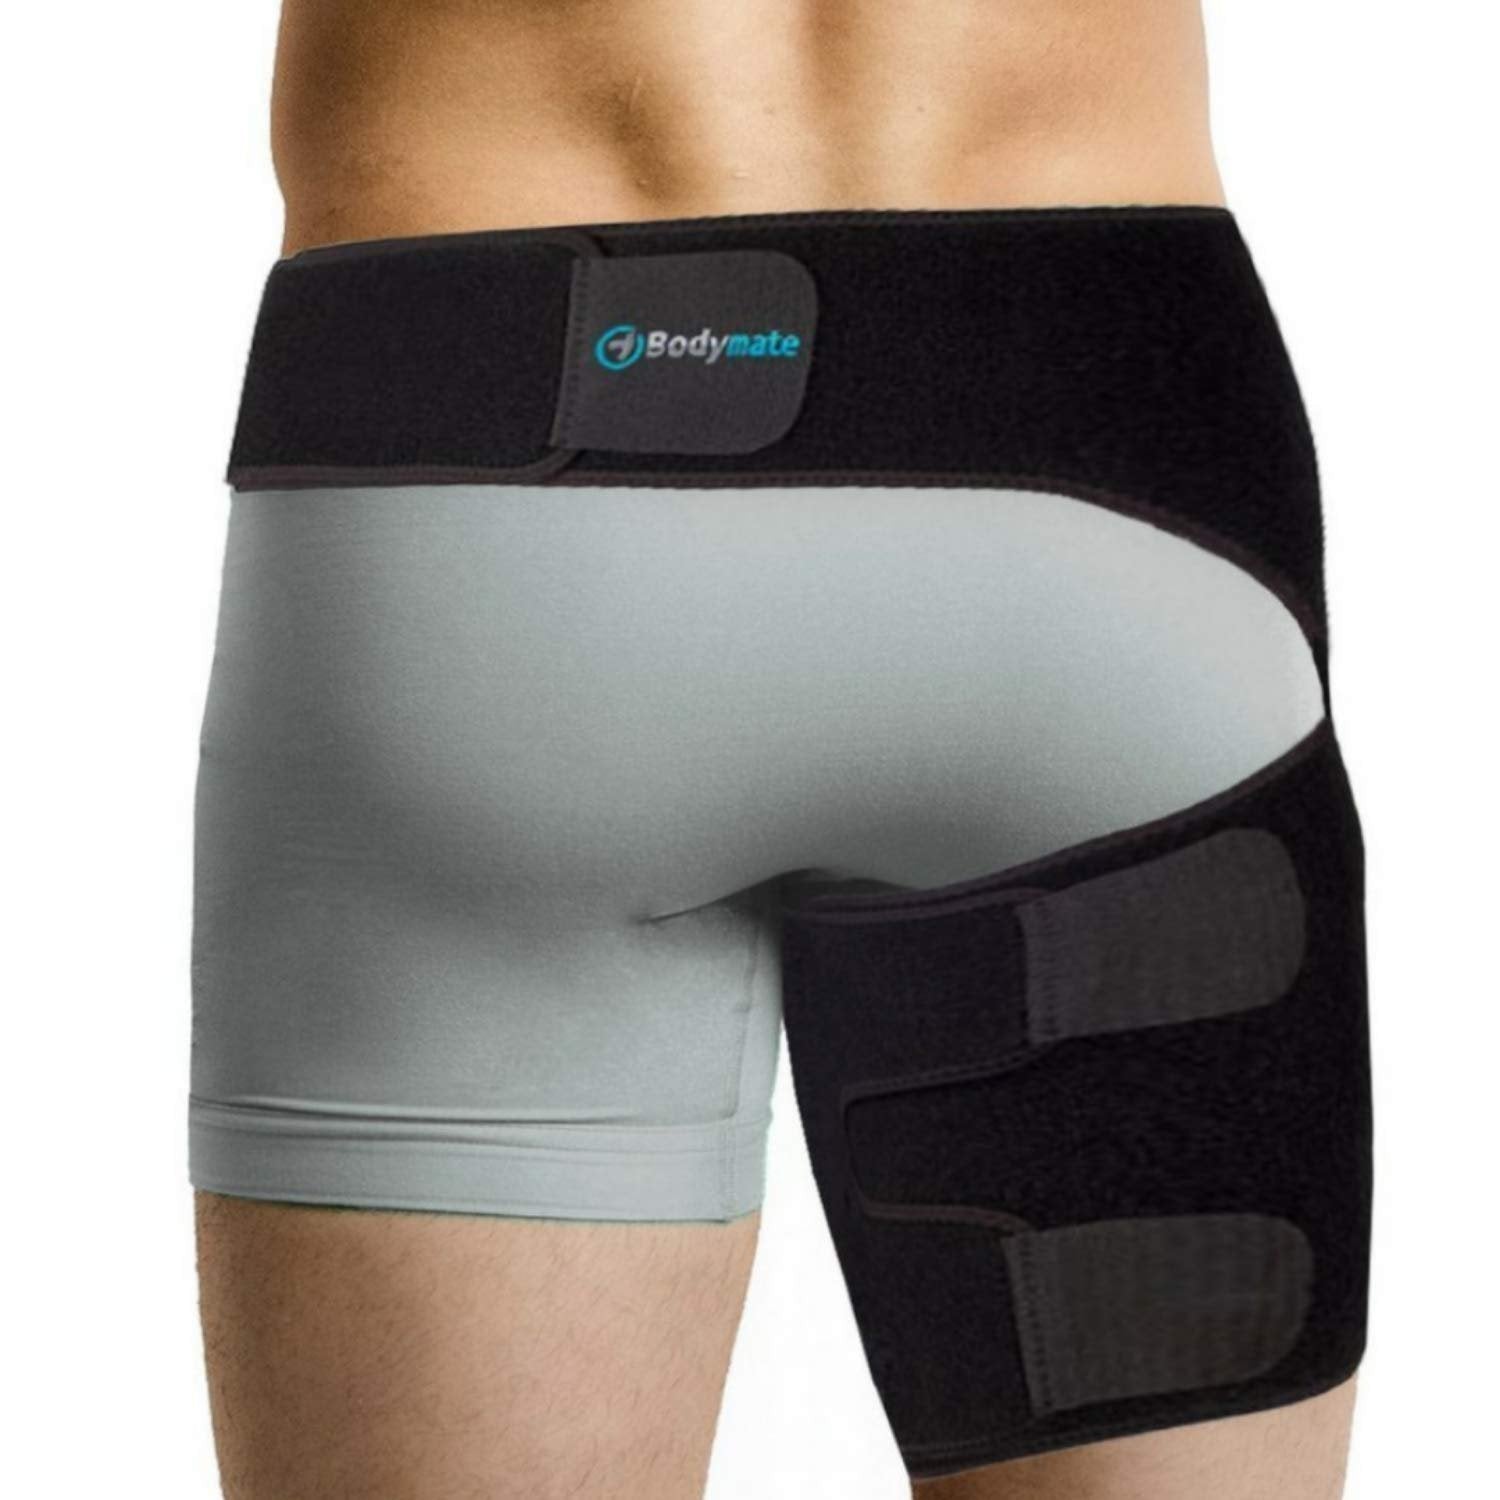 Bodymate Compression Brace for Hip, Sciatica Pain Relief - Large Size - Free Shipping